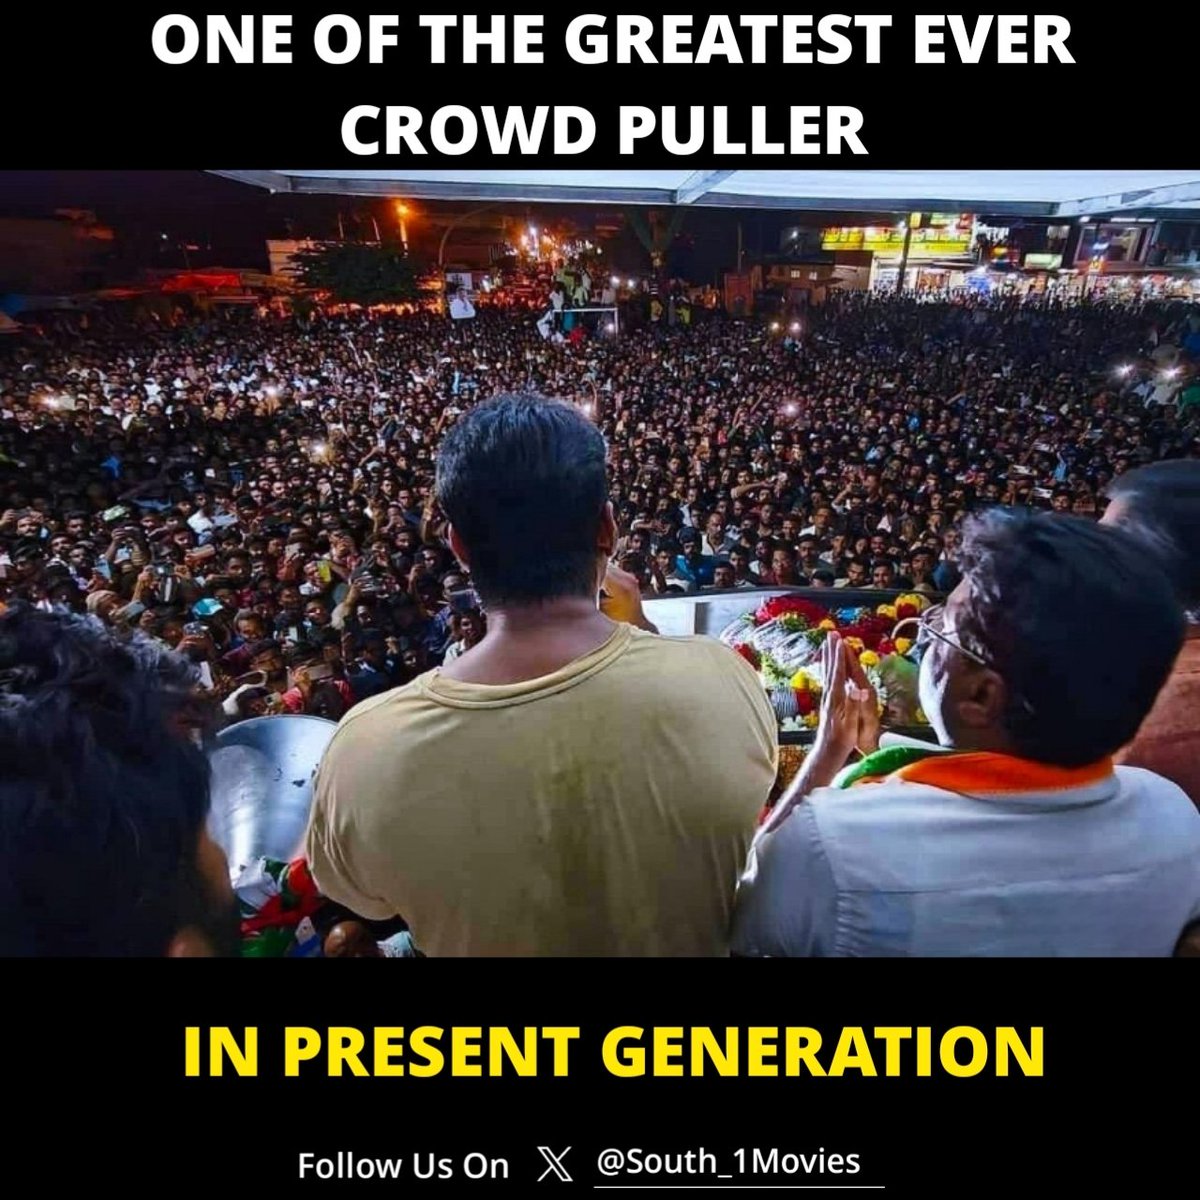 One of the greatest ever crowd puller in present generation is @dasadarshan 🔥

#BossOfSandalwood  #DBoss
#DevilTheHero